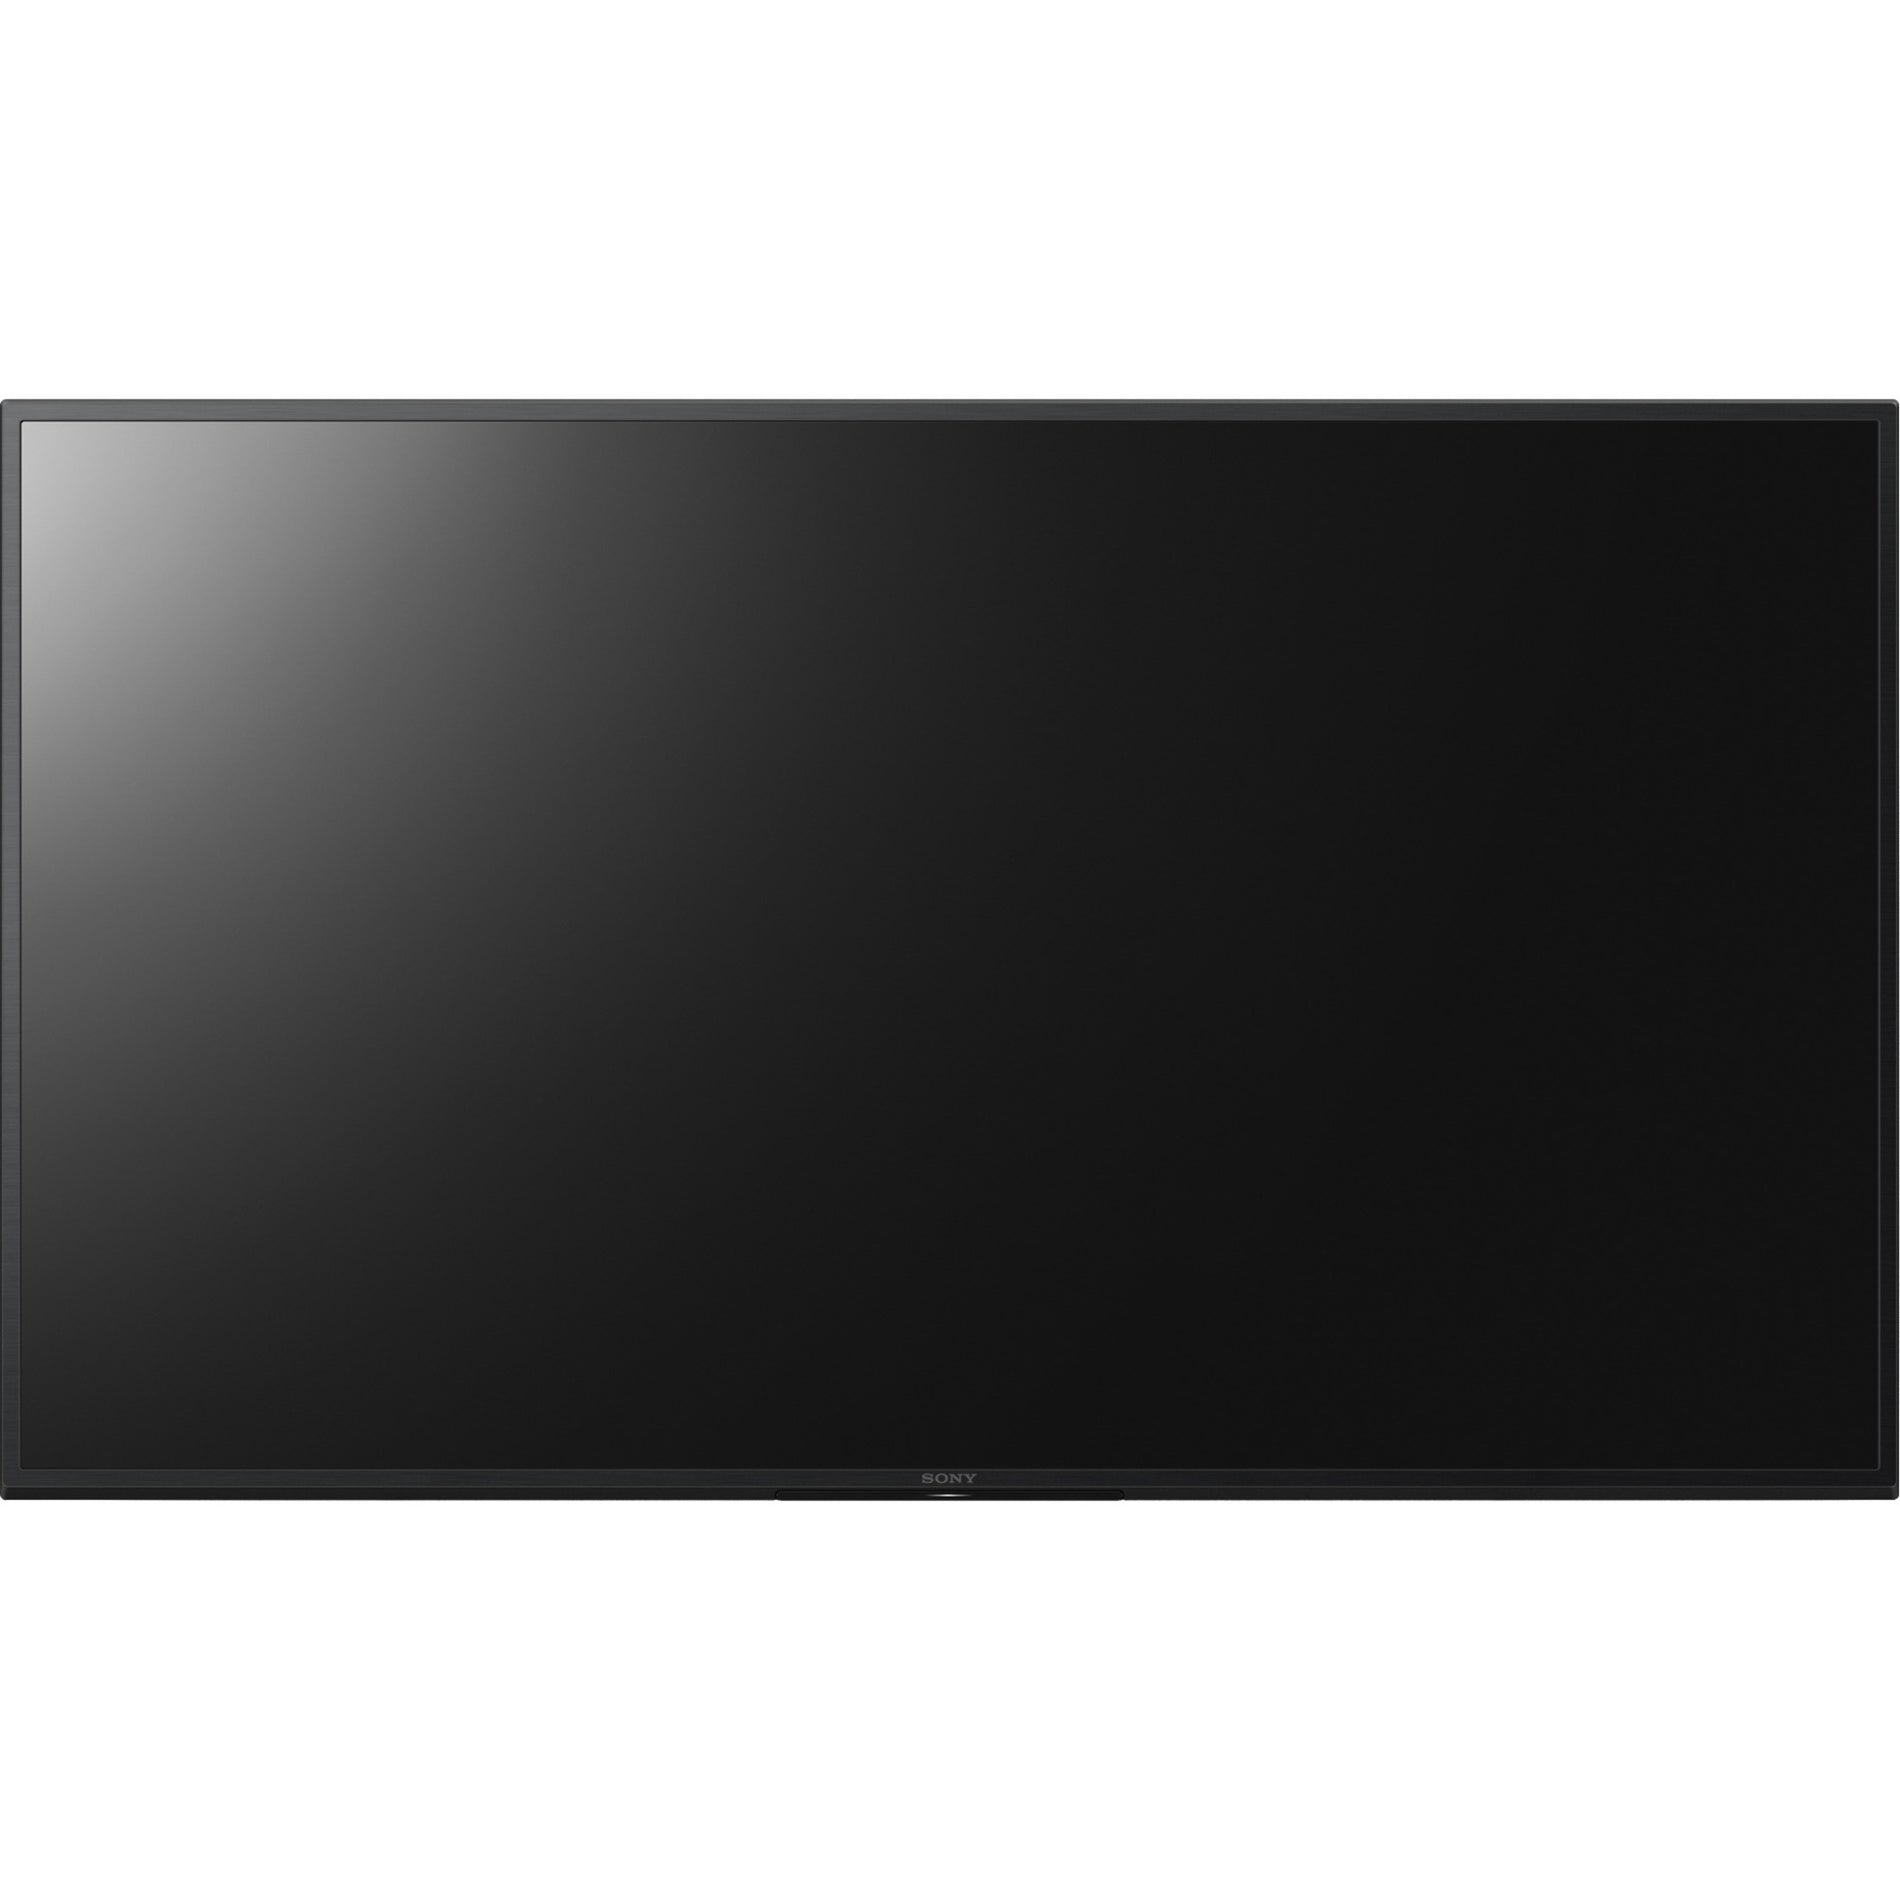 Sony Pro FW43BZ30J 43-inch BRAVIA 4K Ultra HD HDR Professional Display, Android 10, 3 Year Warranty, Energy Star, USB, HDMI, Serial, 440 Nit, 2160p, 400,000:1 Dynamic Contrast Ratio